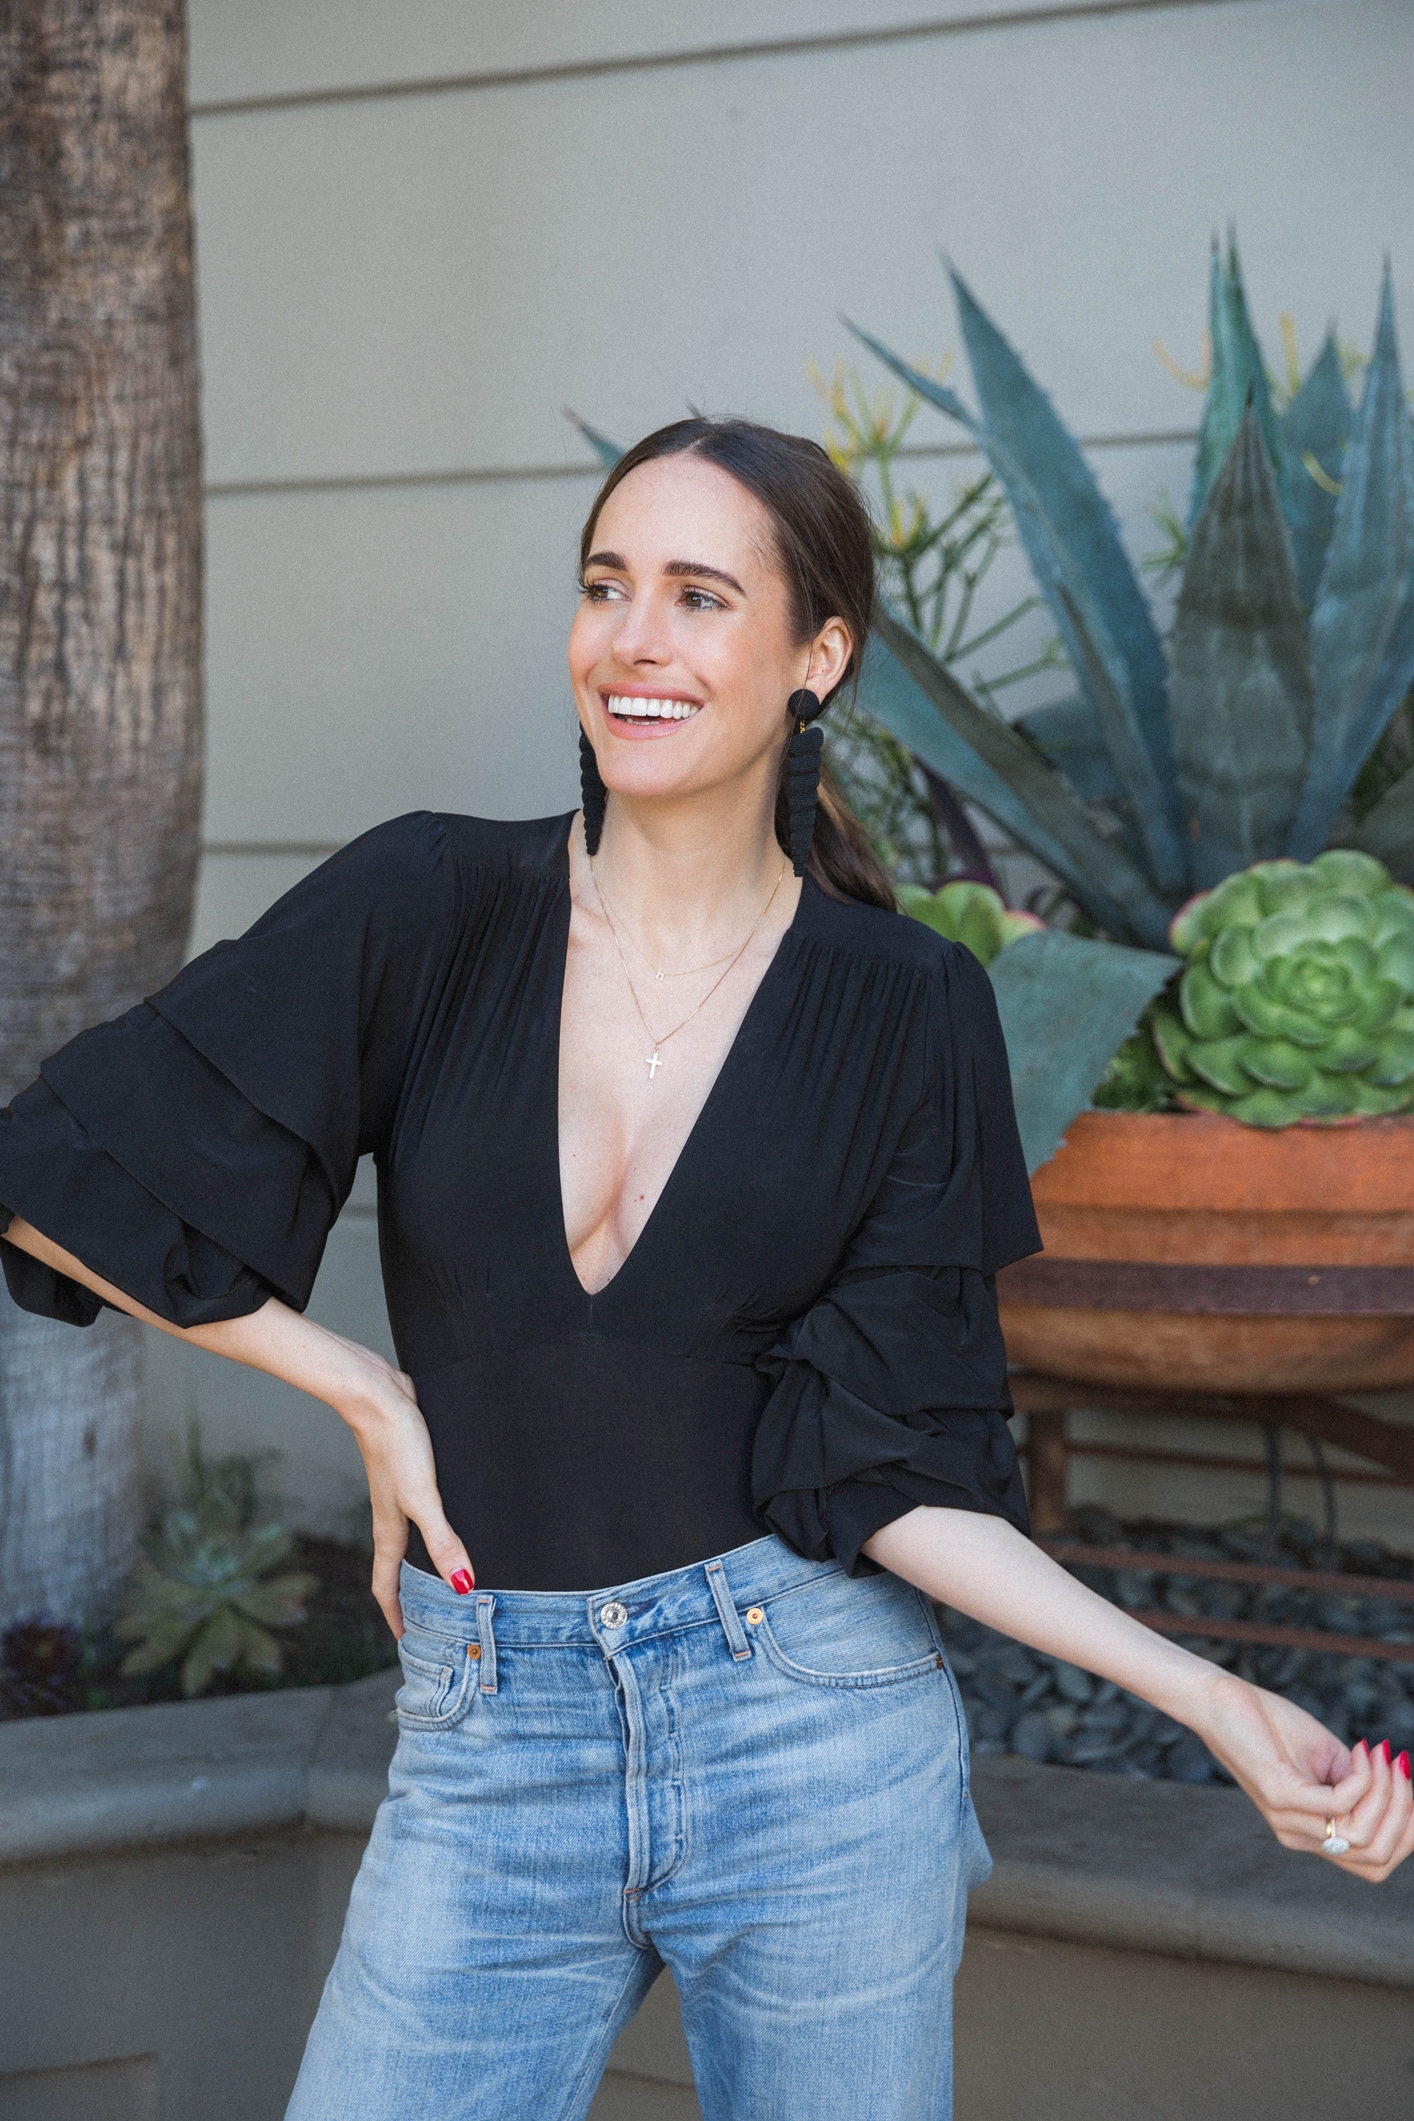 Louise Roe Fashion Inspiration Tips | Jeans And Ruffle Top